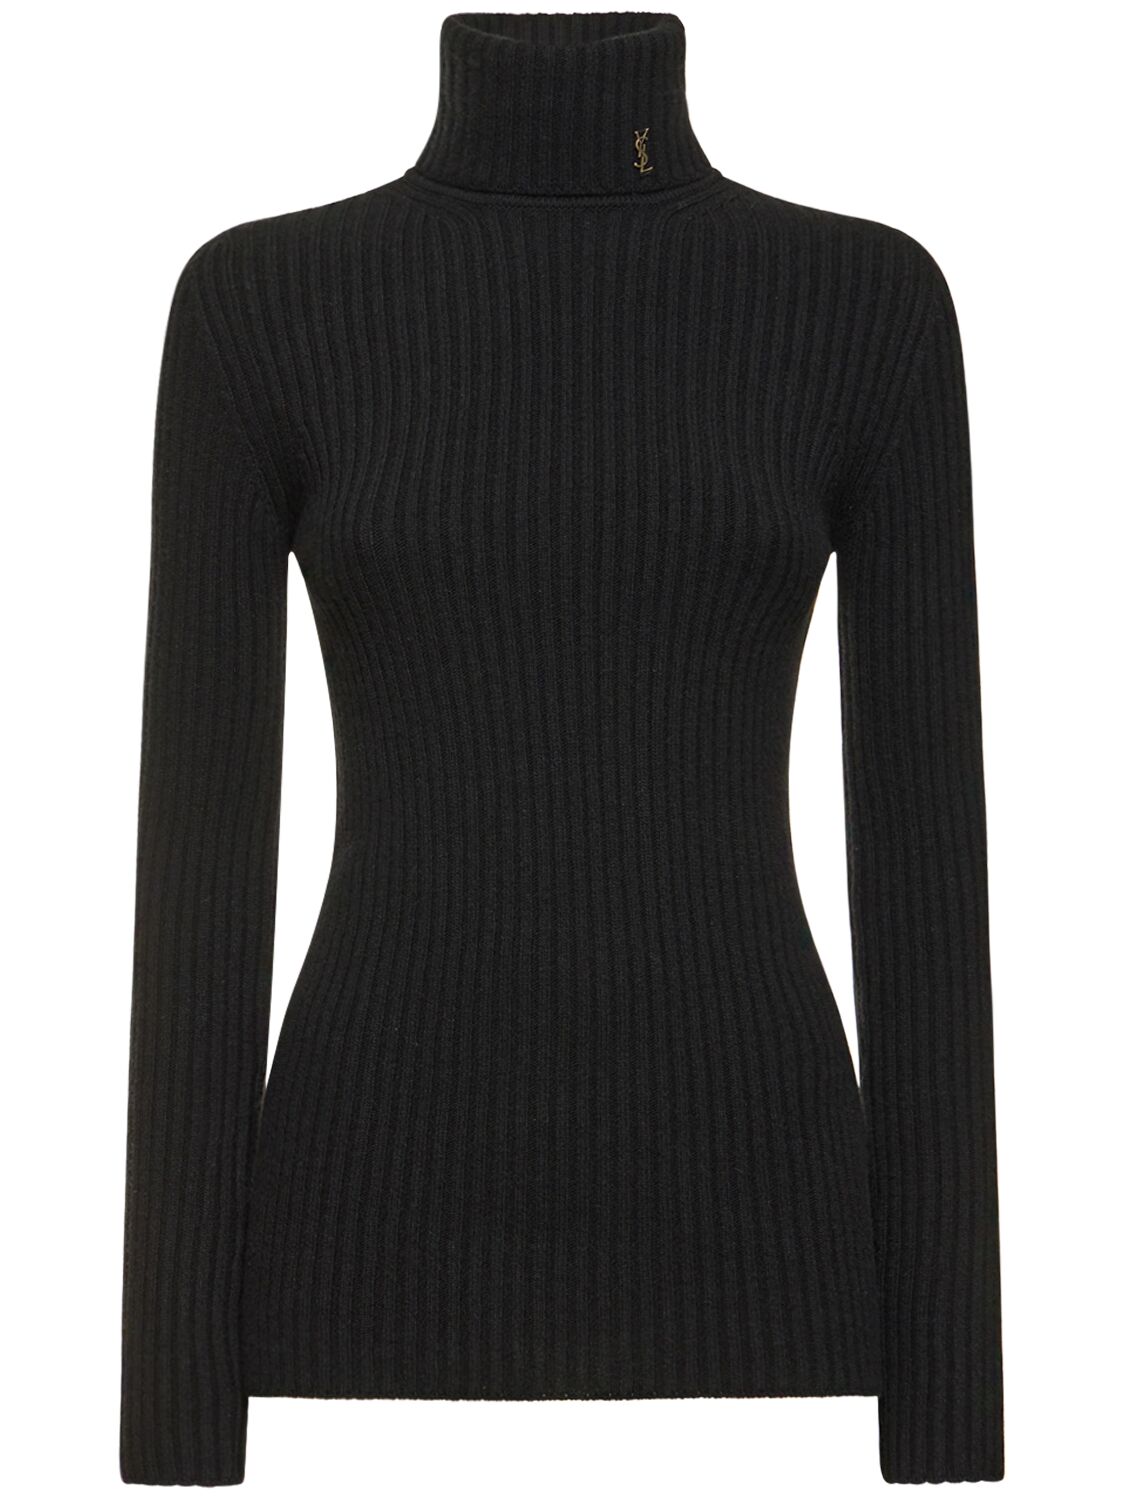 Maille Wool & Cashmere Knit Sweater